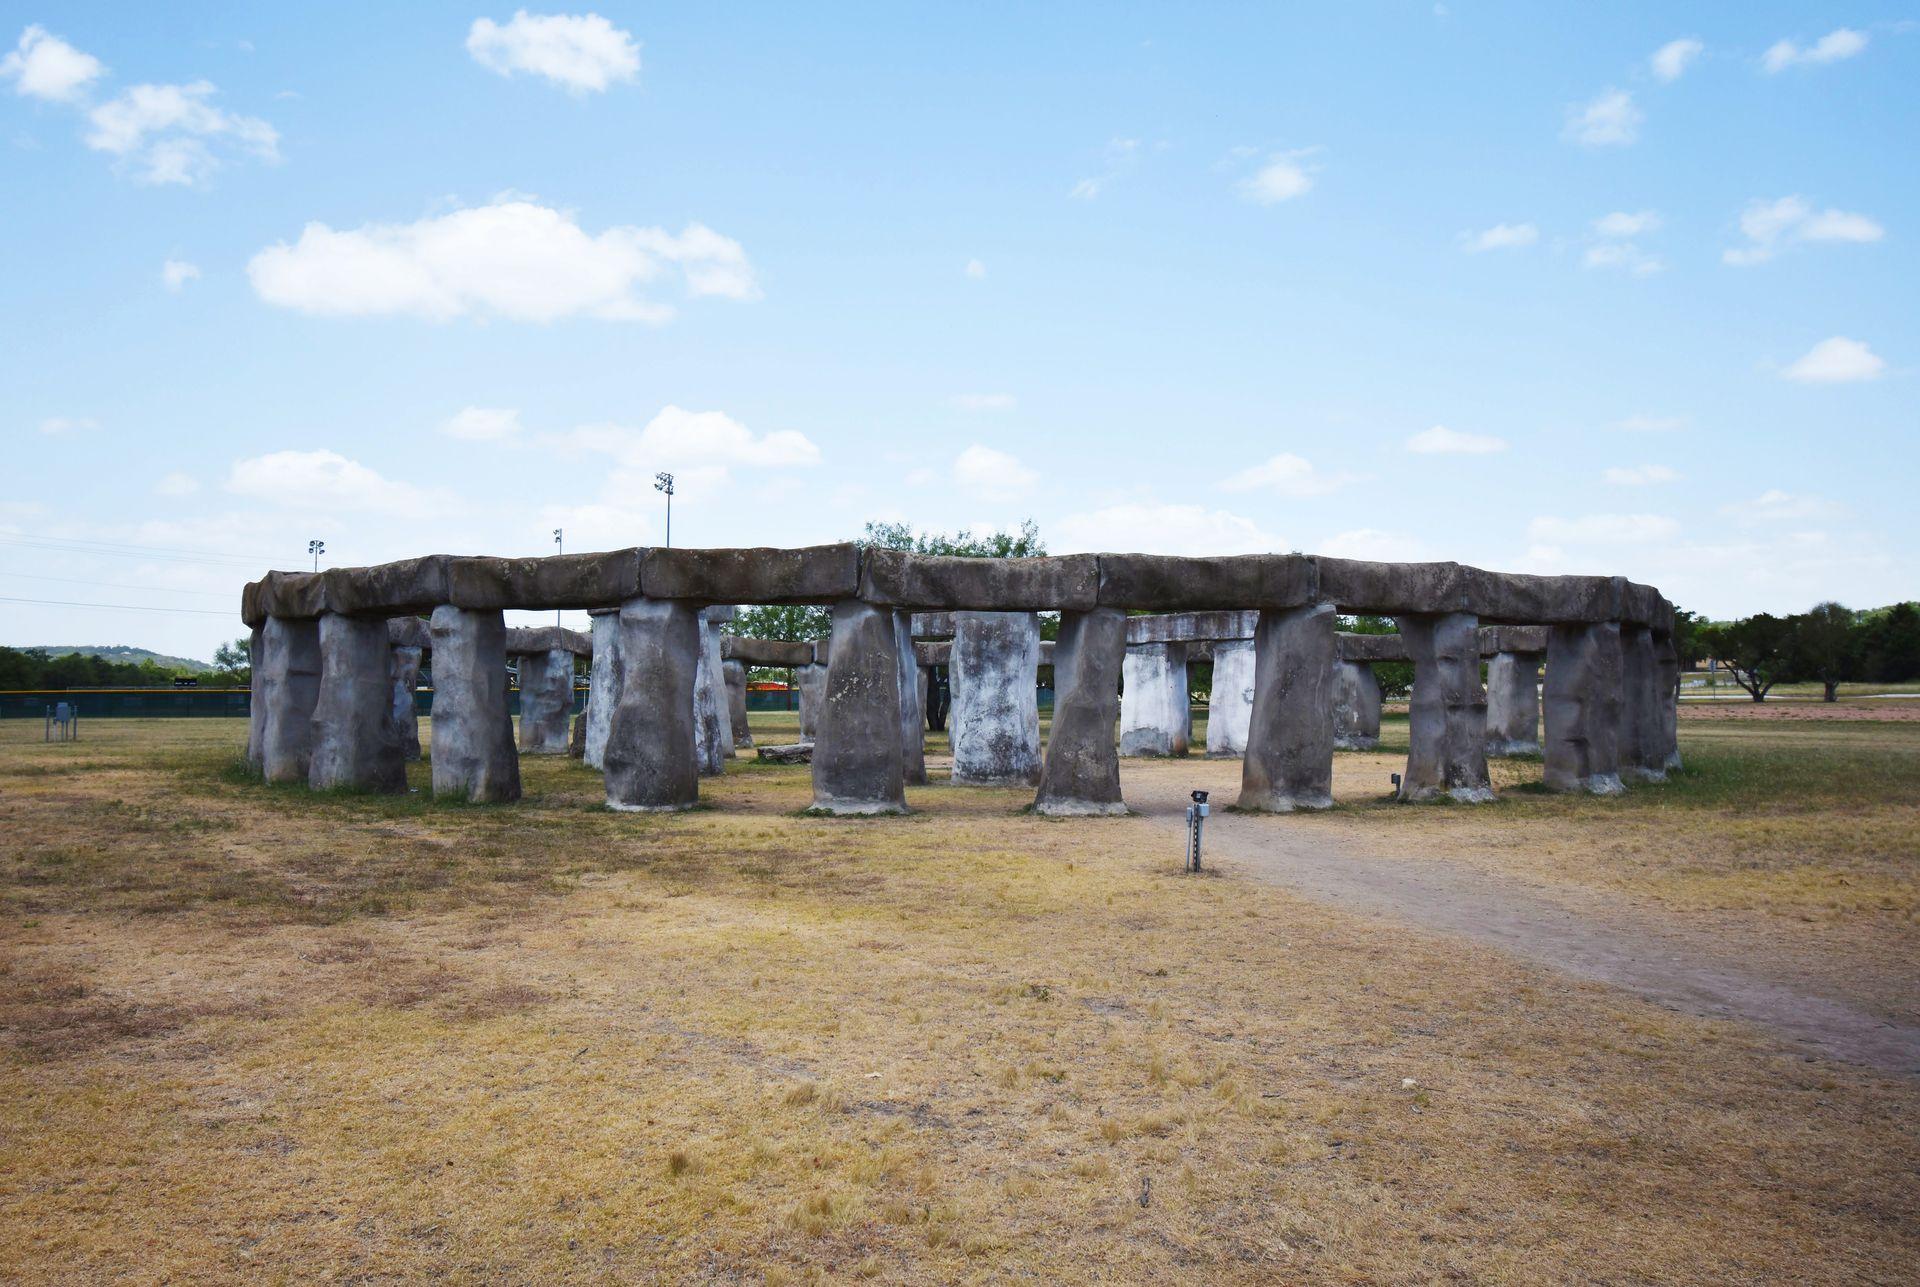 A view of Stonehenge II in Ingrams, Texas. It looks like the UK Stonehenge but it is smaller and more in tact.